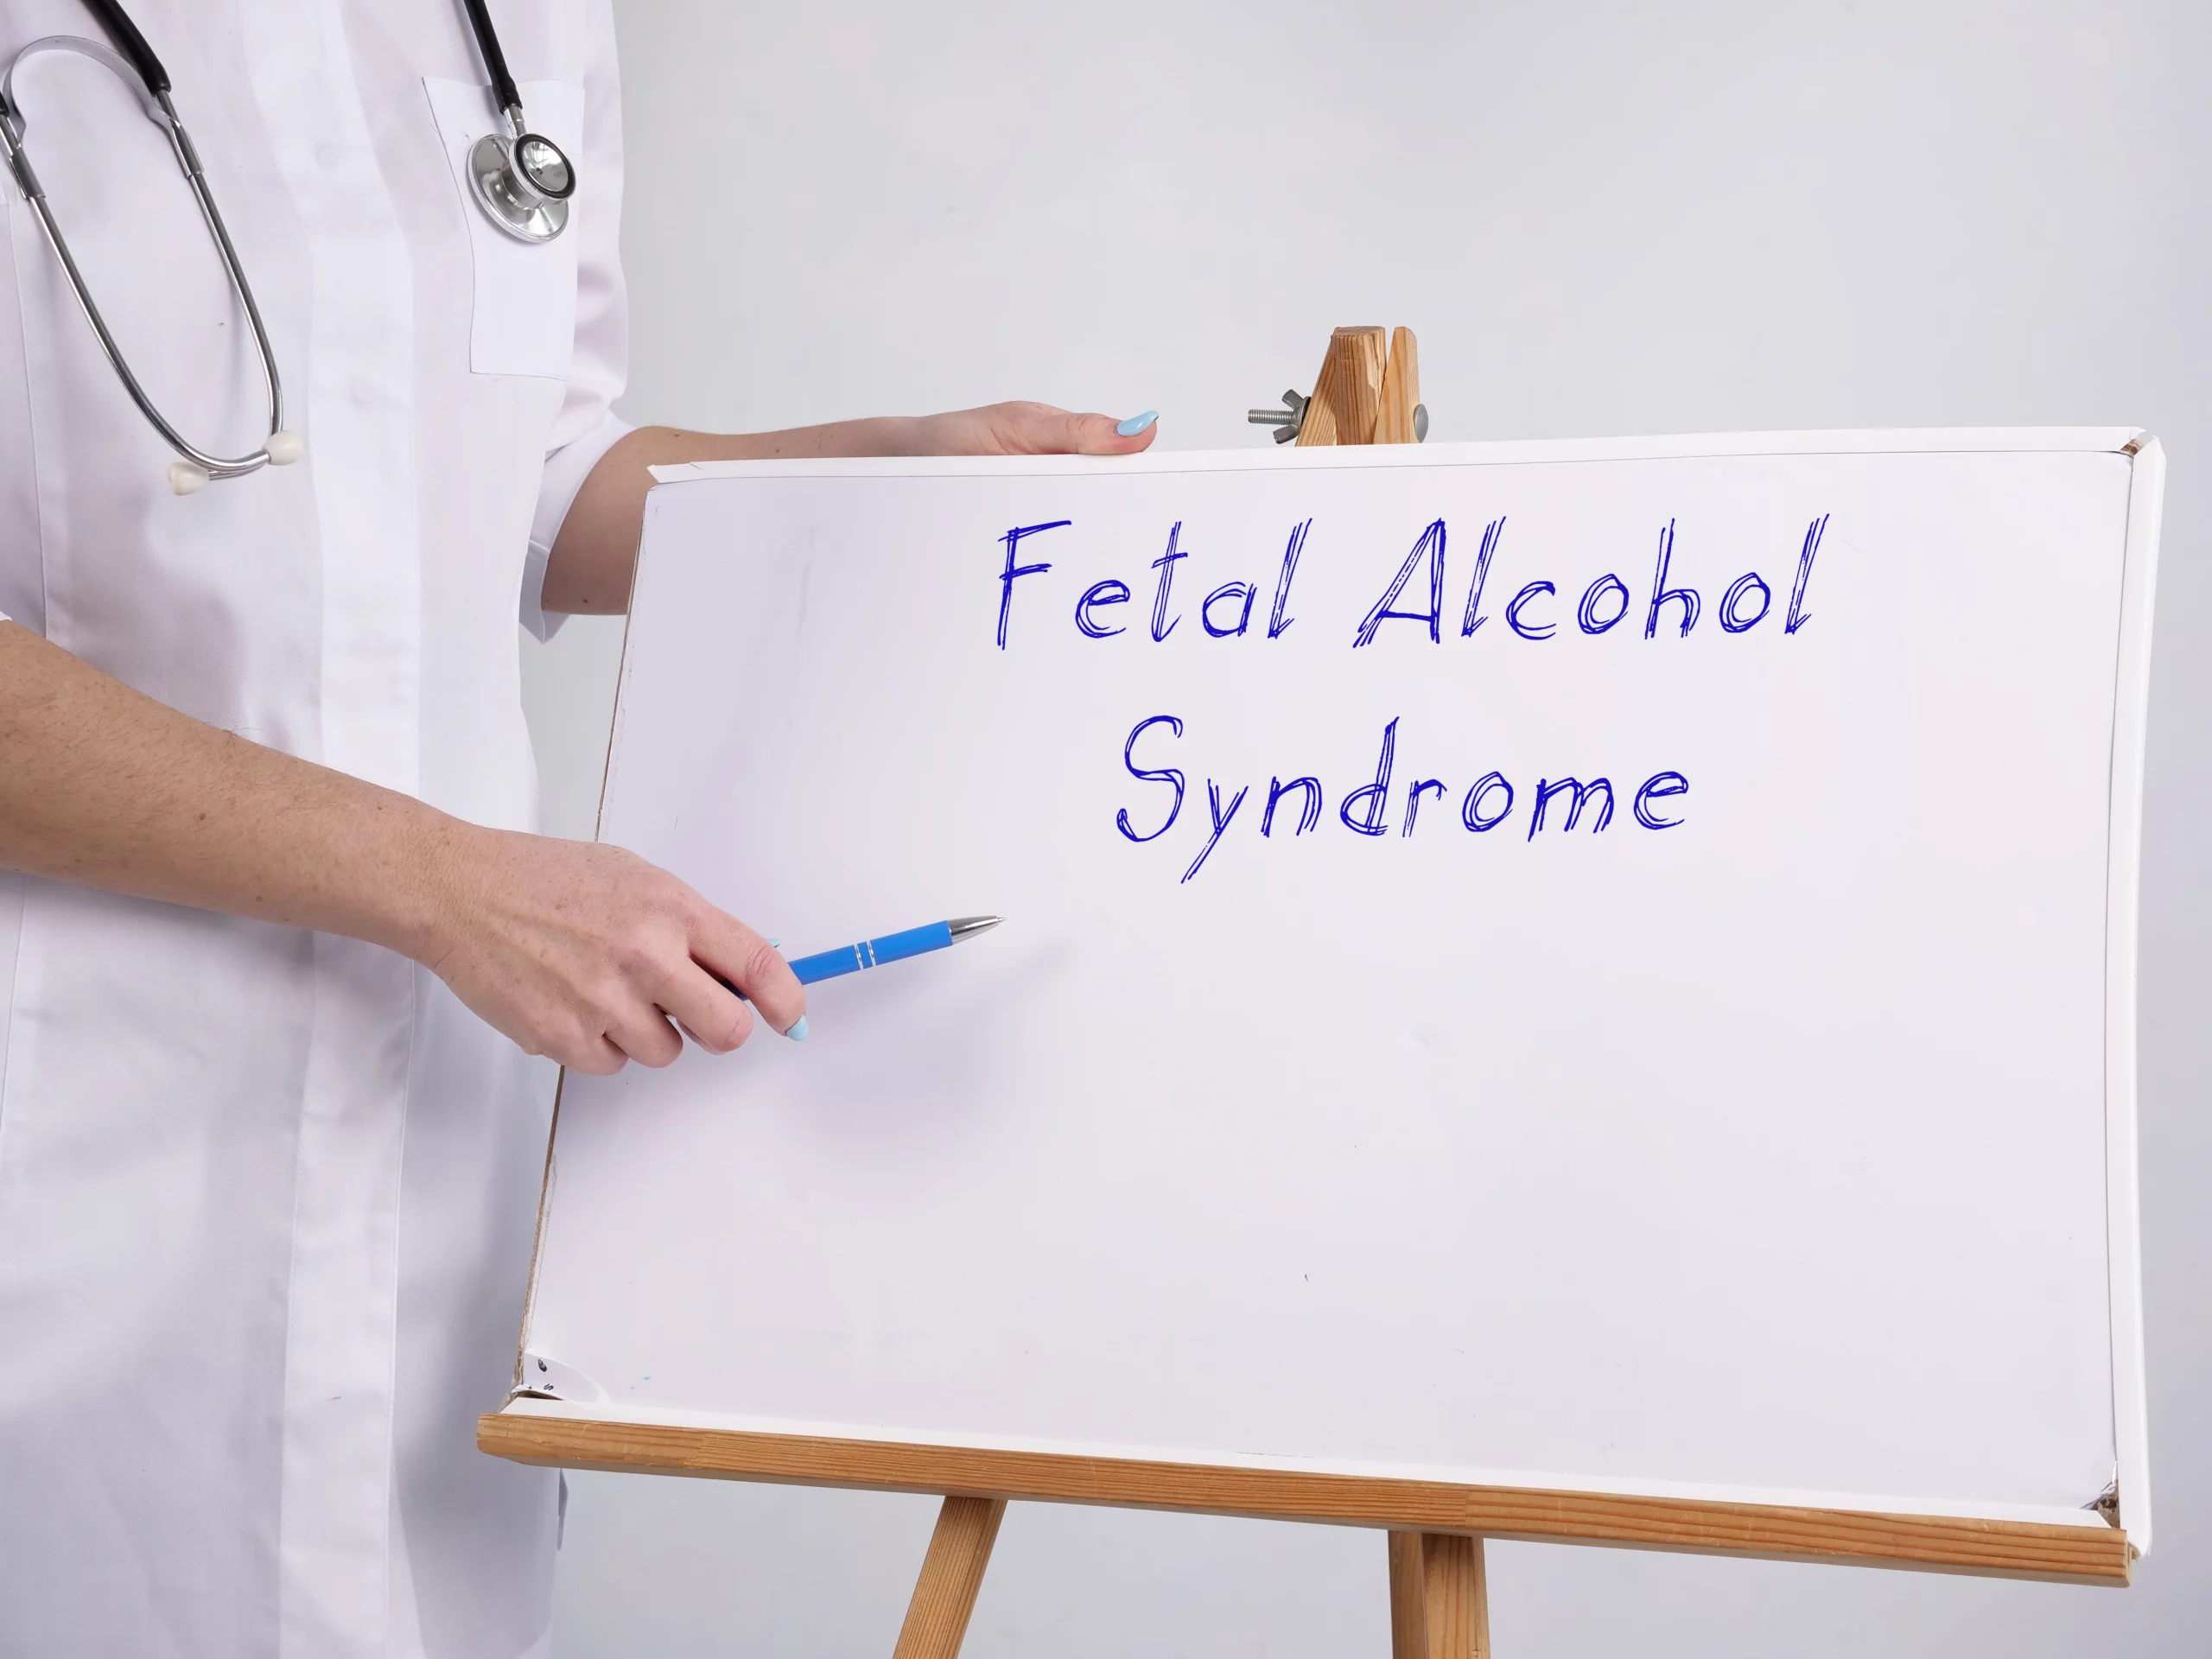 famous people fetal alcohol syndrome